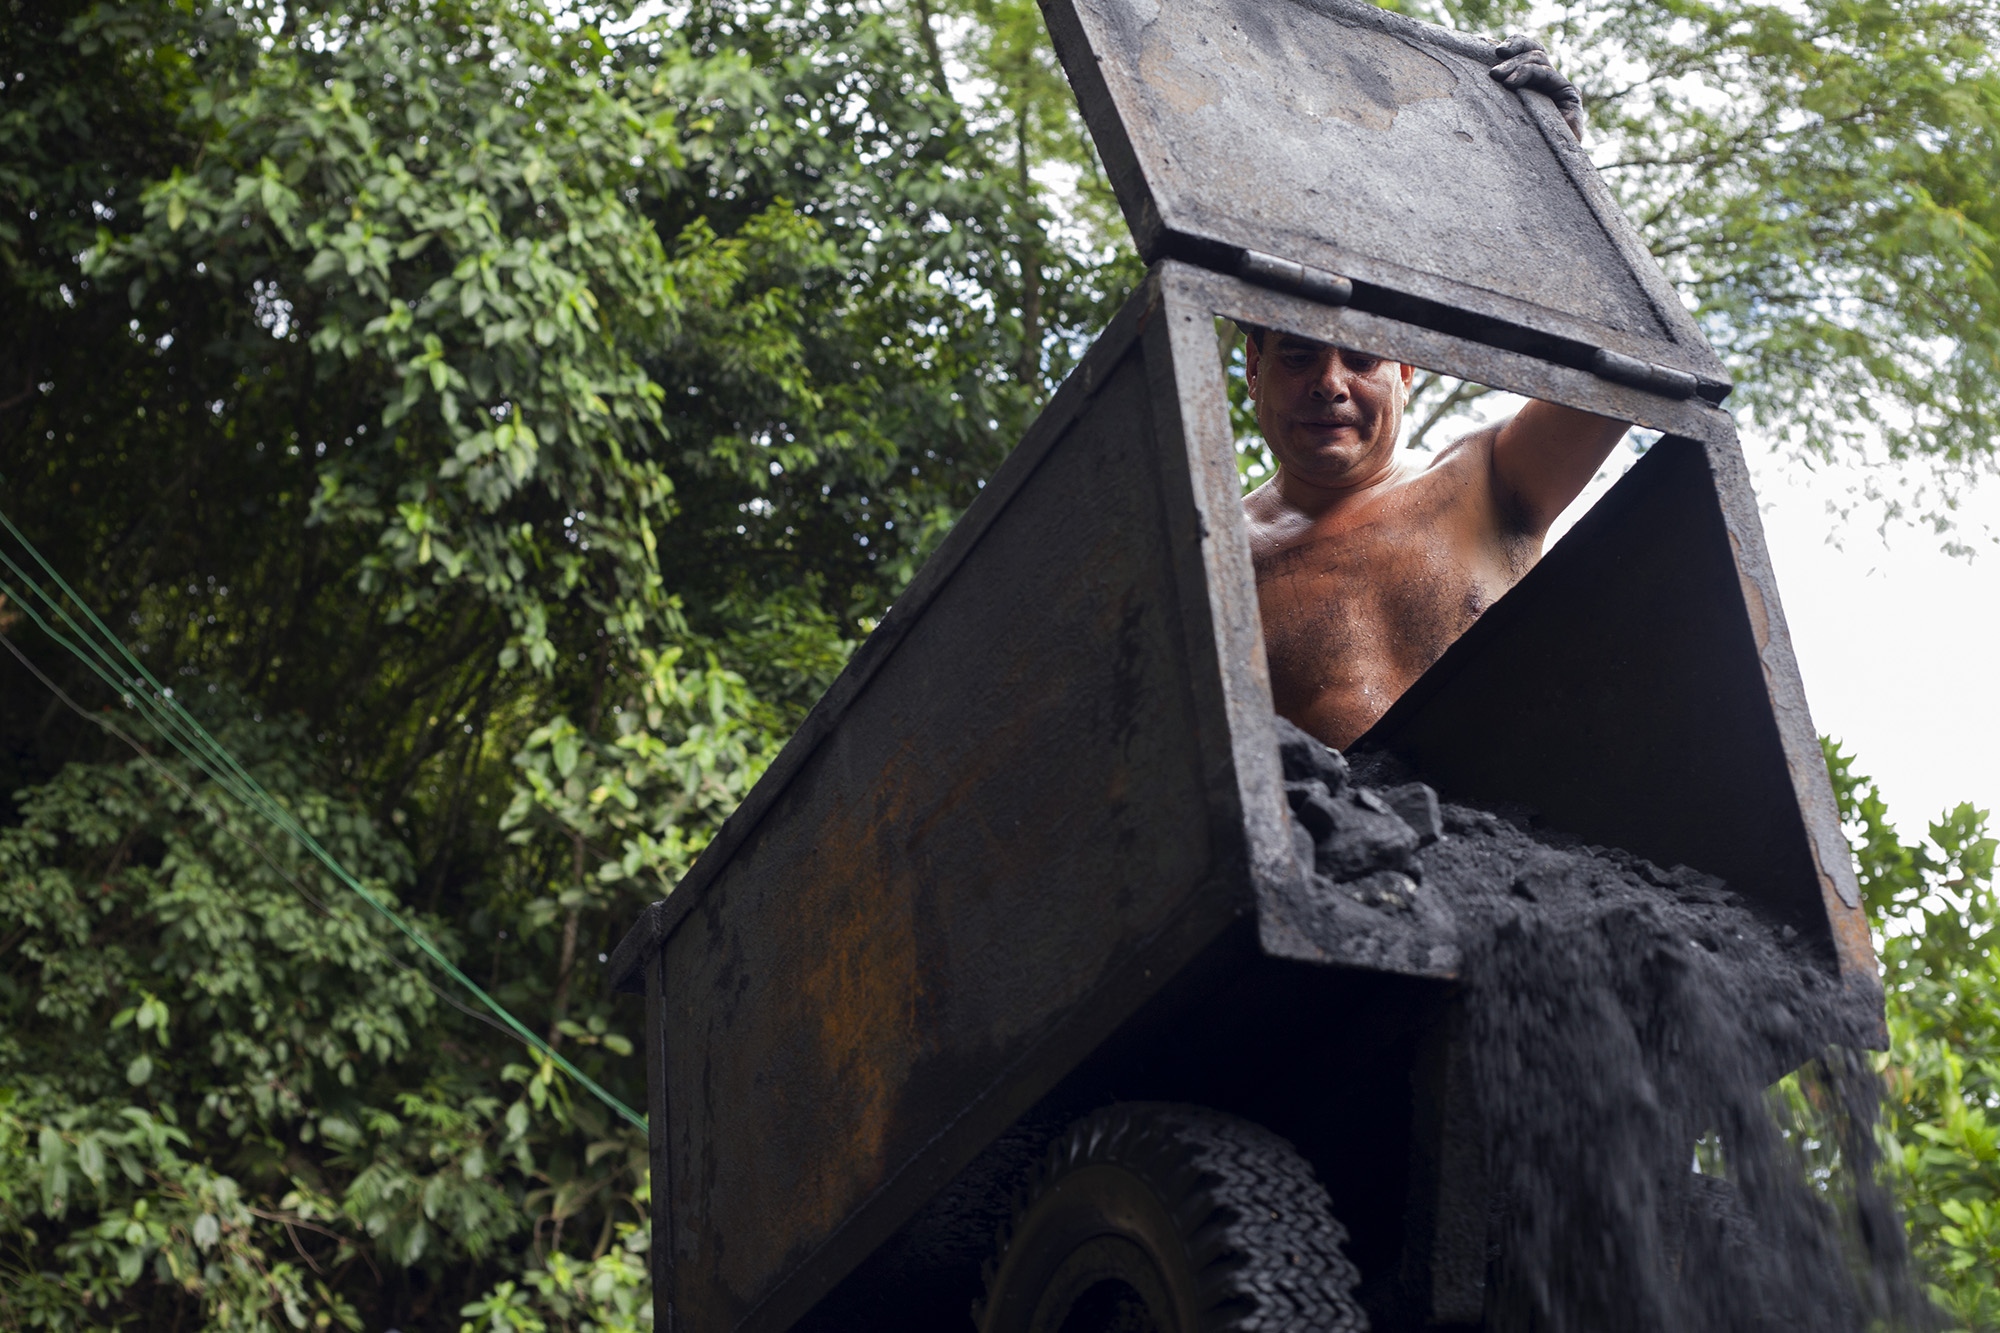 Muzo - A miner works with a cart to transport soil to an emerald...